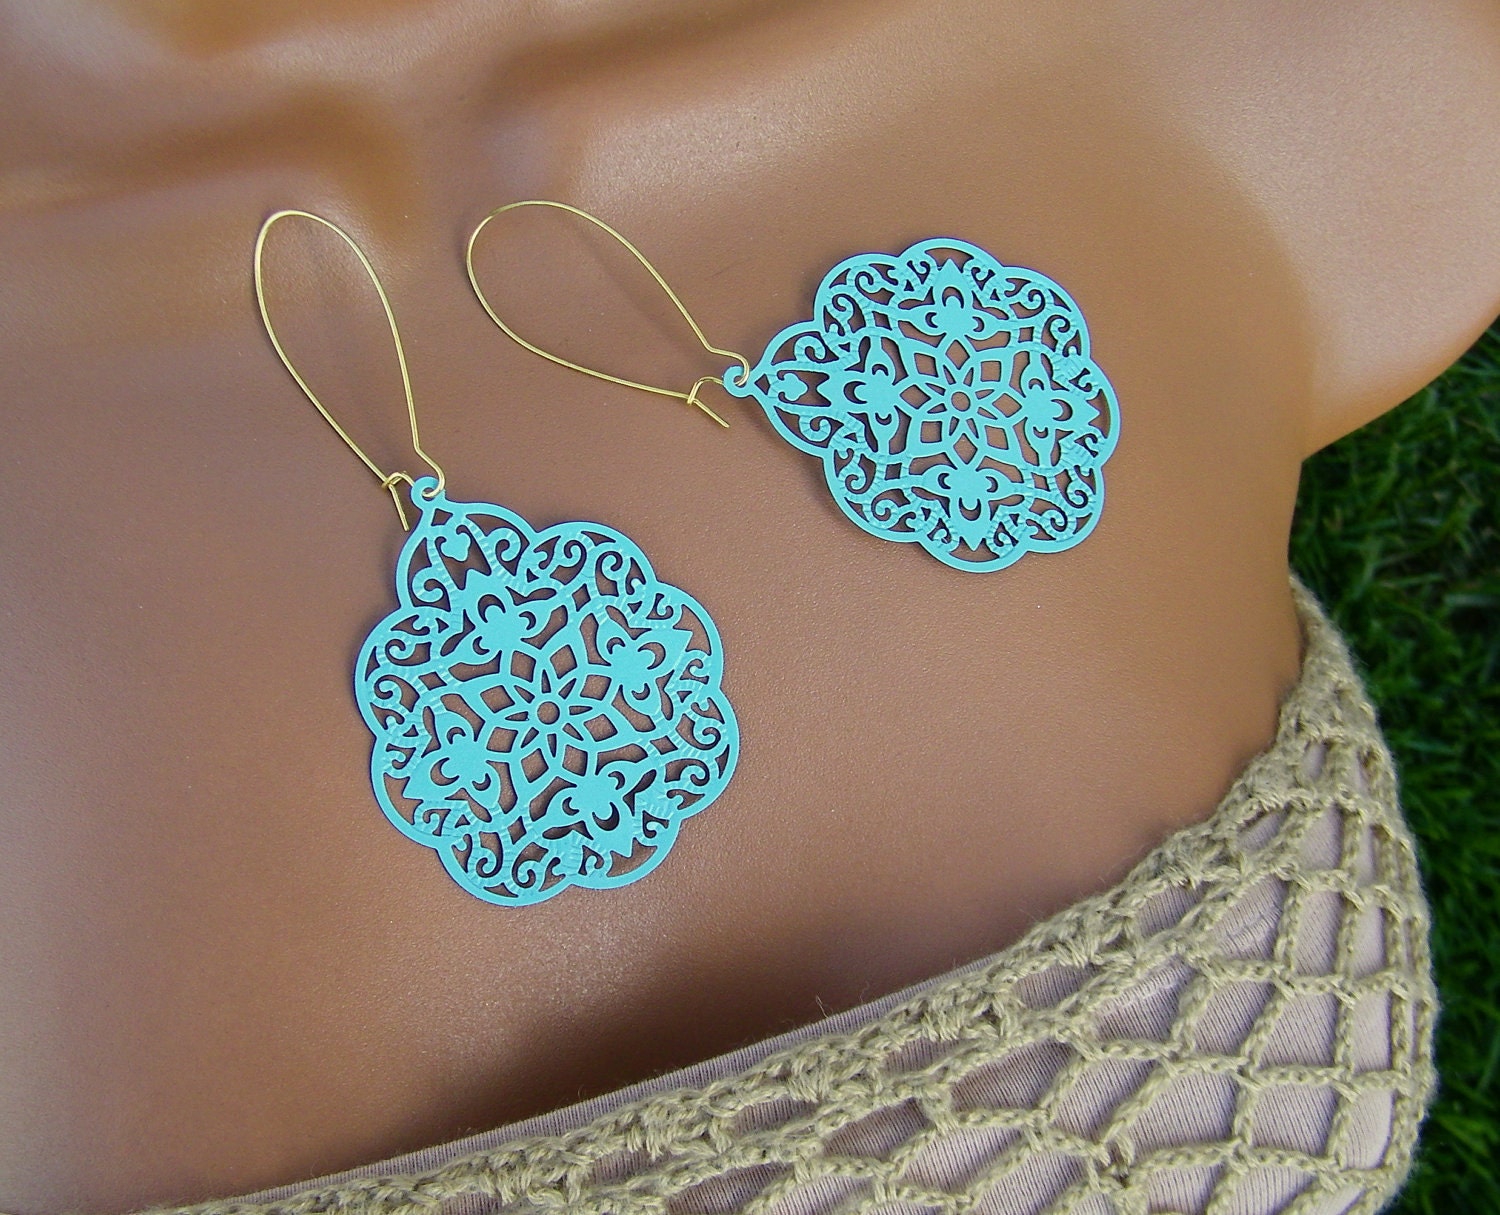 Pretty aqua mint blue lacy filigree earrings. 1 7/8" wide and 3" long. The photo shows the earrings with gold plated earwires. This listing also allows you to select silver plate if you prefer. The dangles are enameled in this pretty cool, mint blue. Bold, feminine statement.